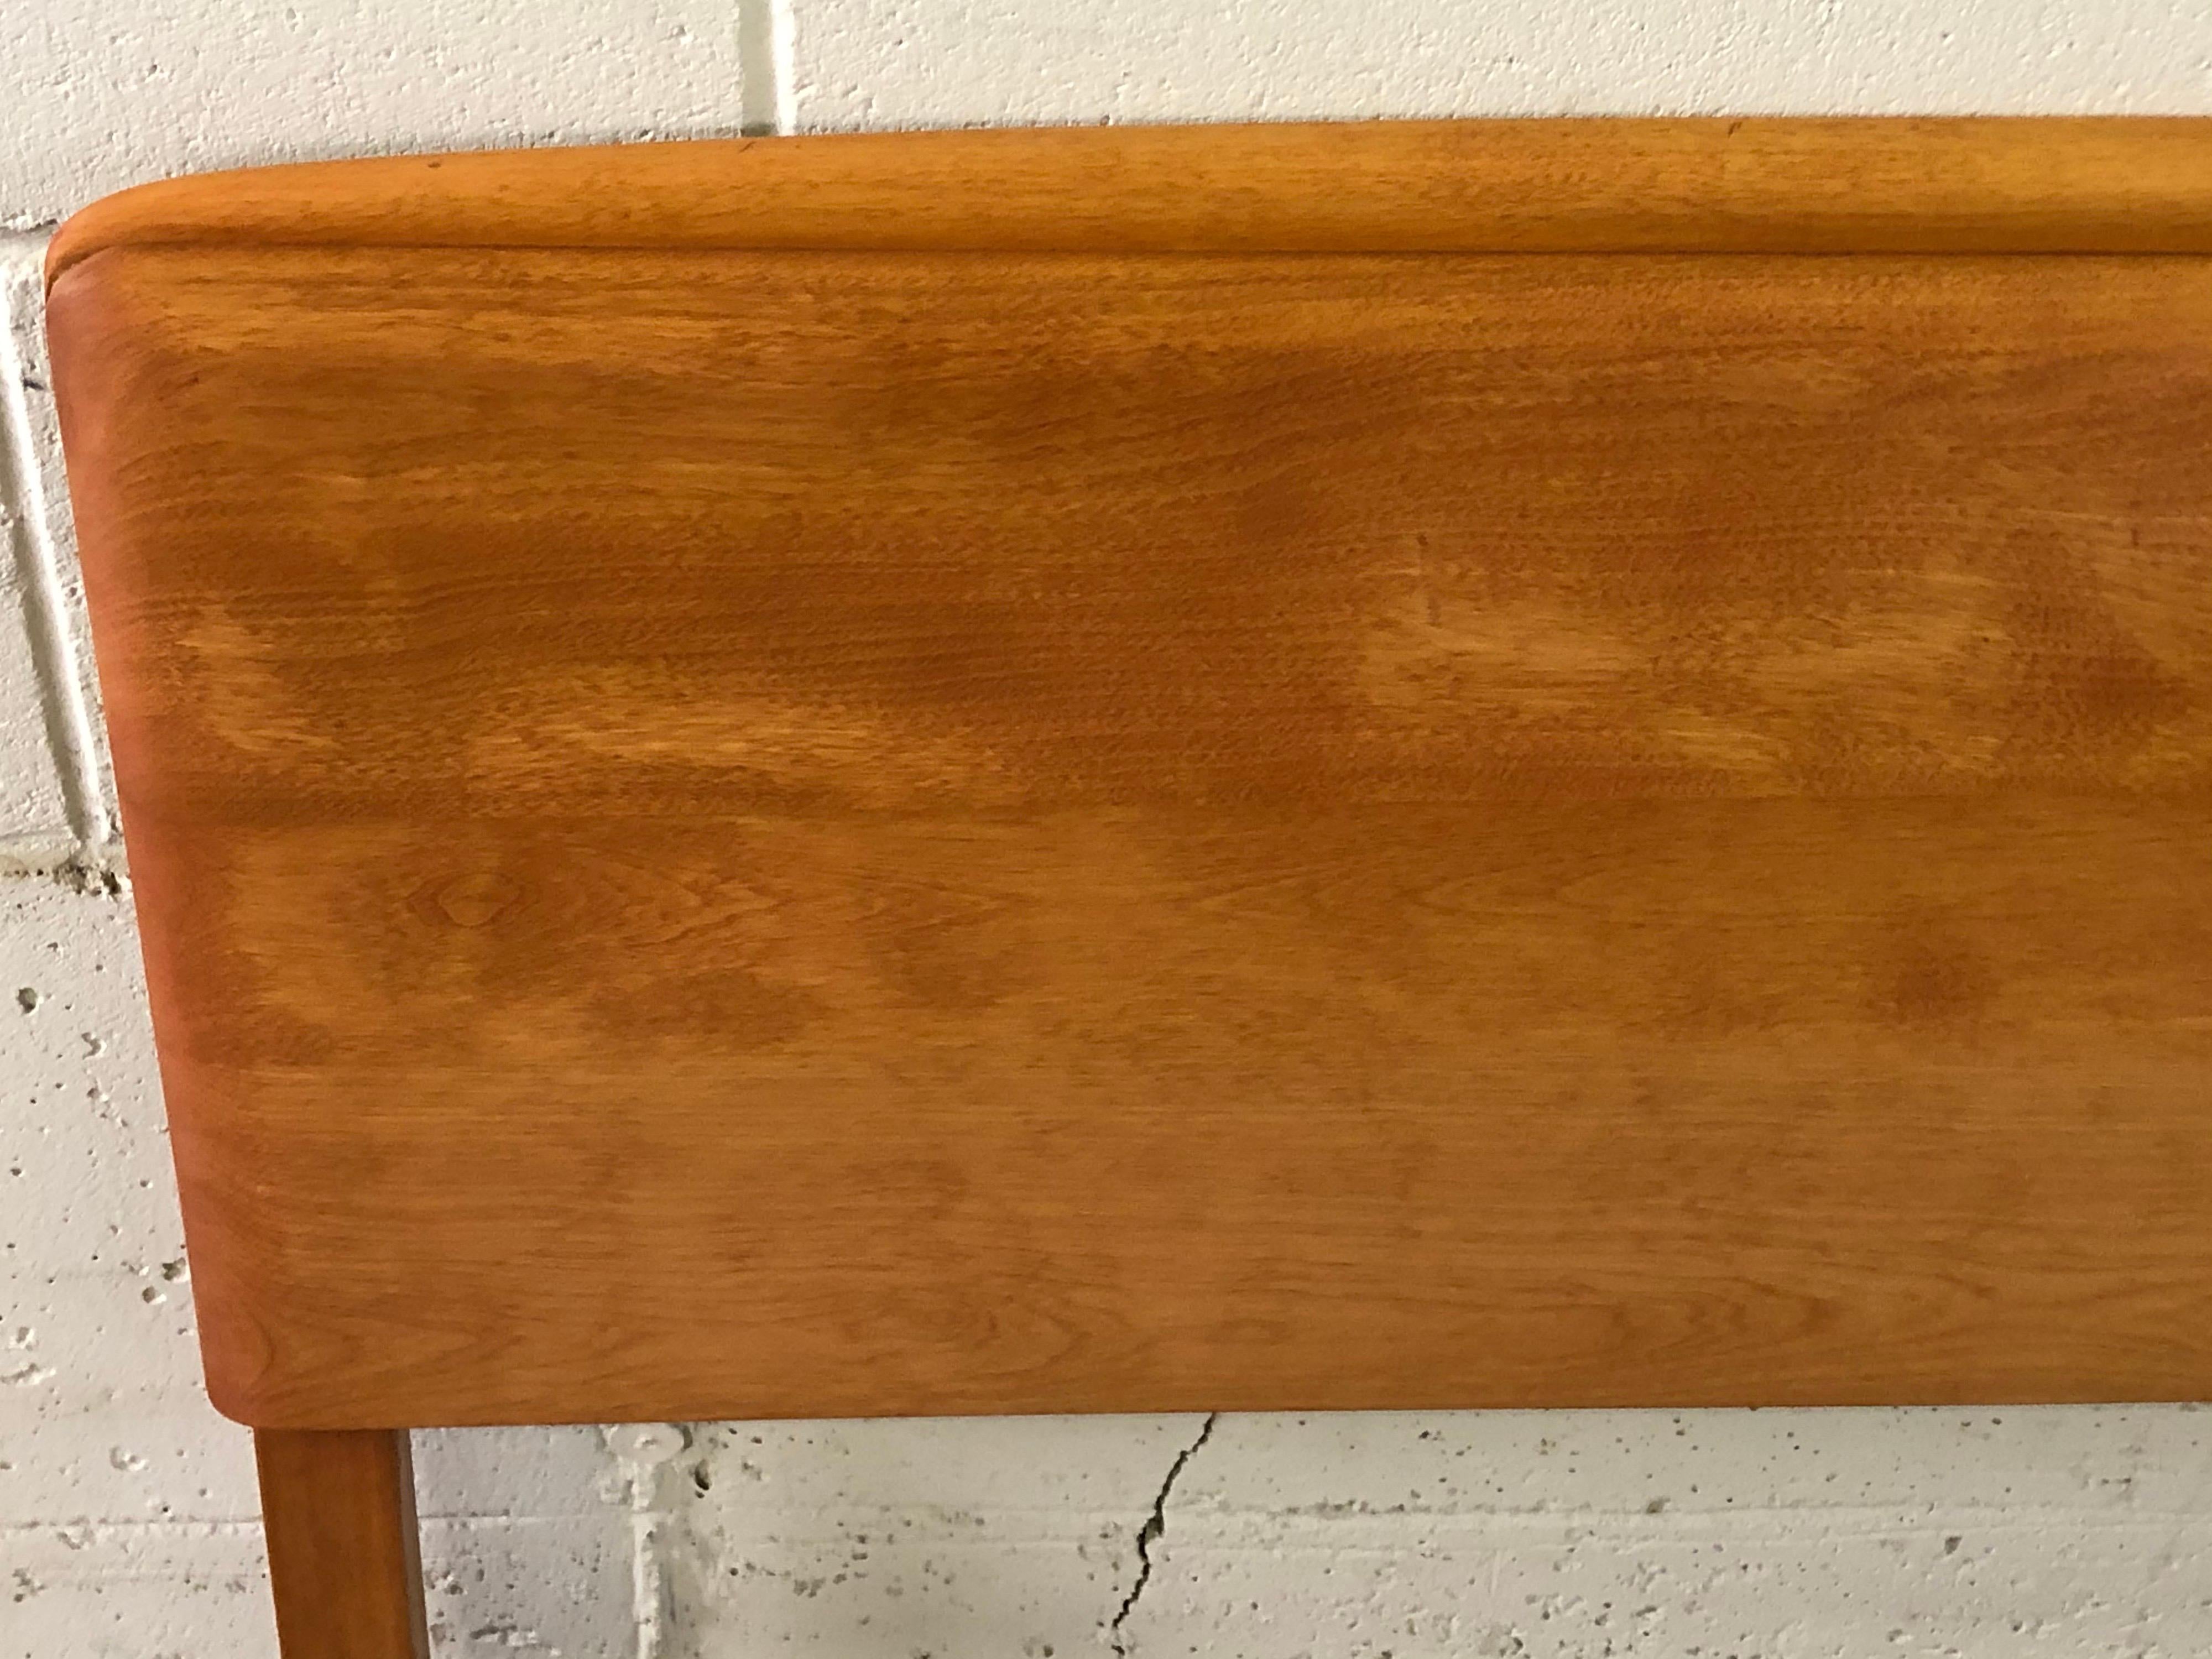 Vintage Heywood-Wakefield maple wood queen size headboard. The rails slots are 55” apart. The headboard is newly refinished and marked.